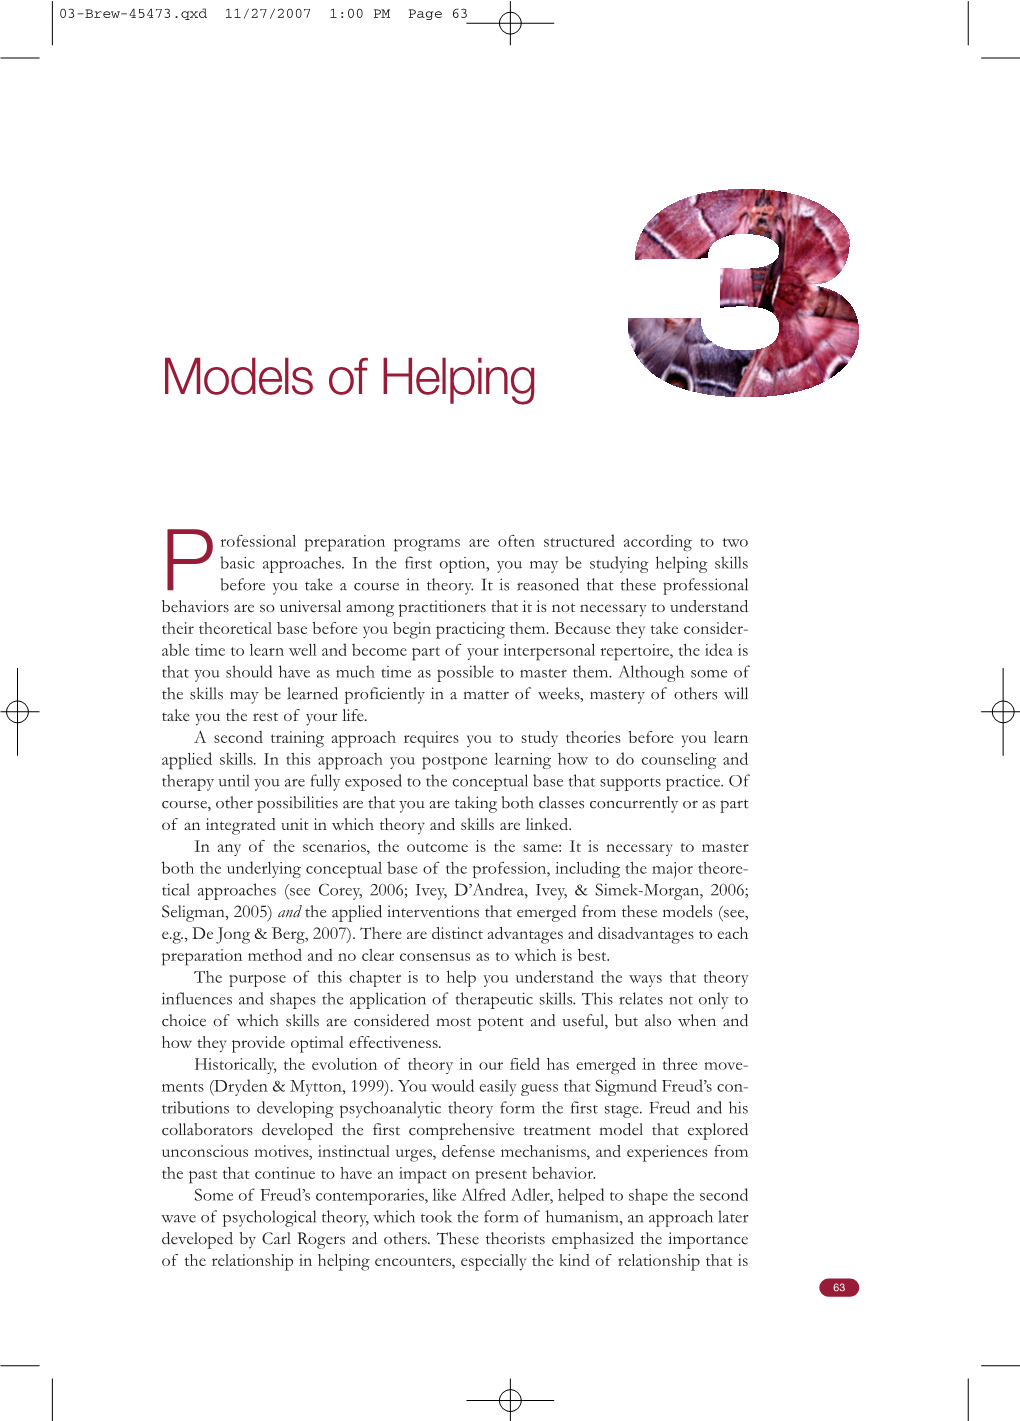 Models of Helping